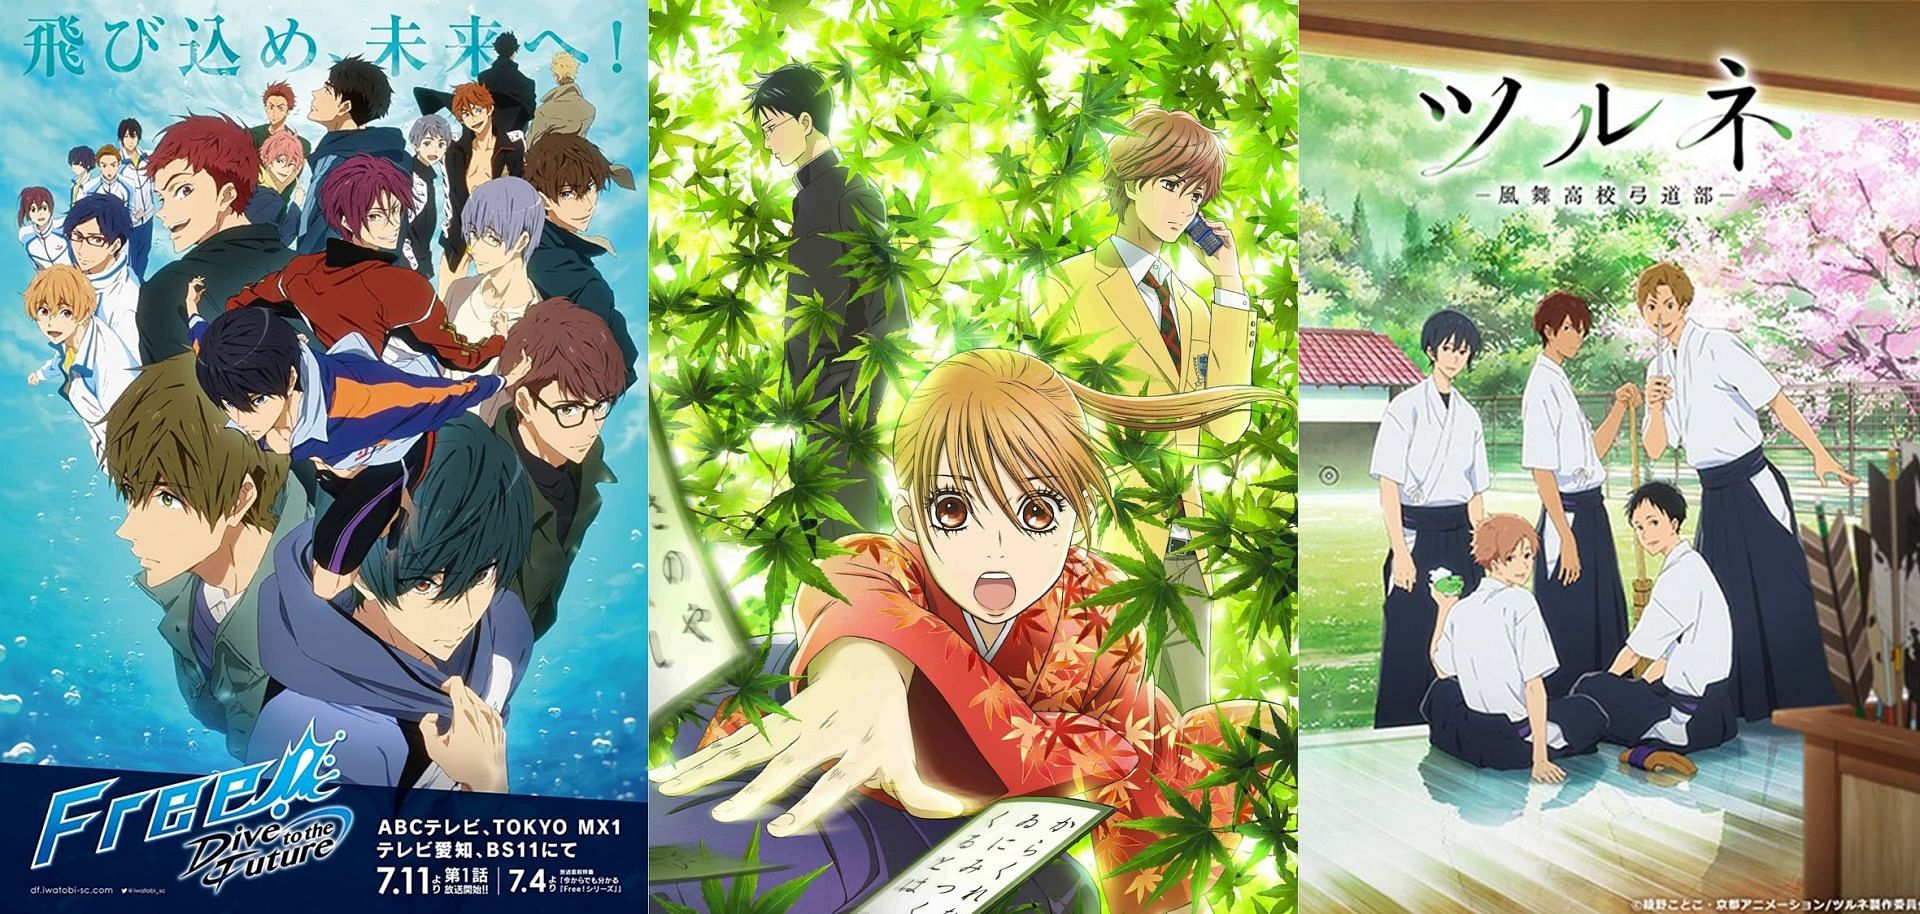 LIST: Anime Series On Netflix With Only One Season